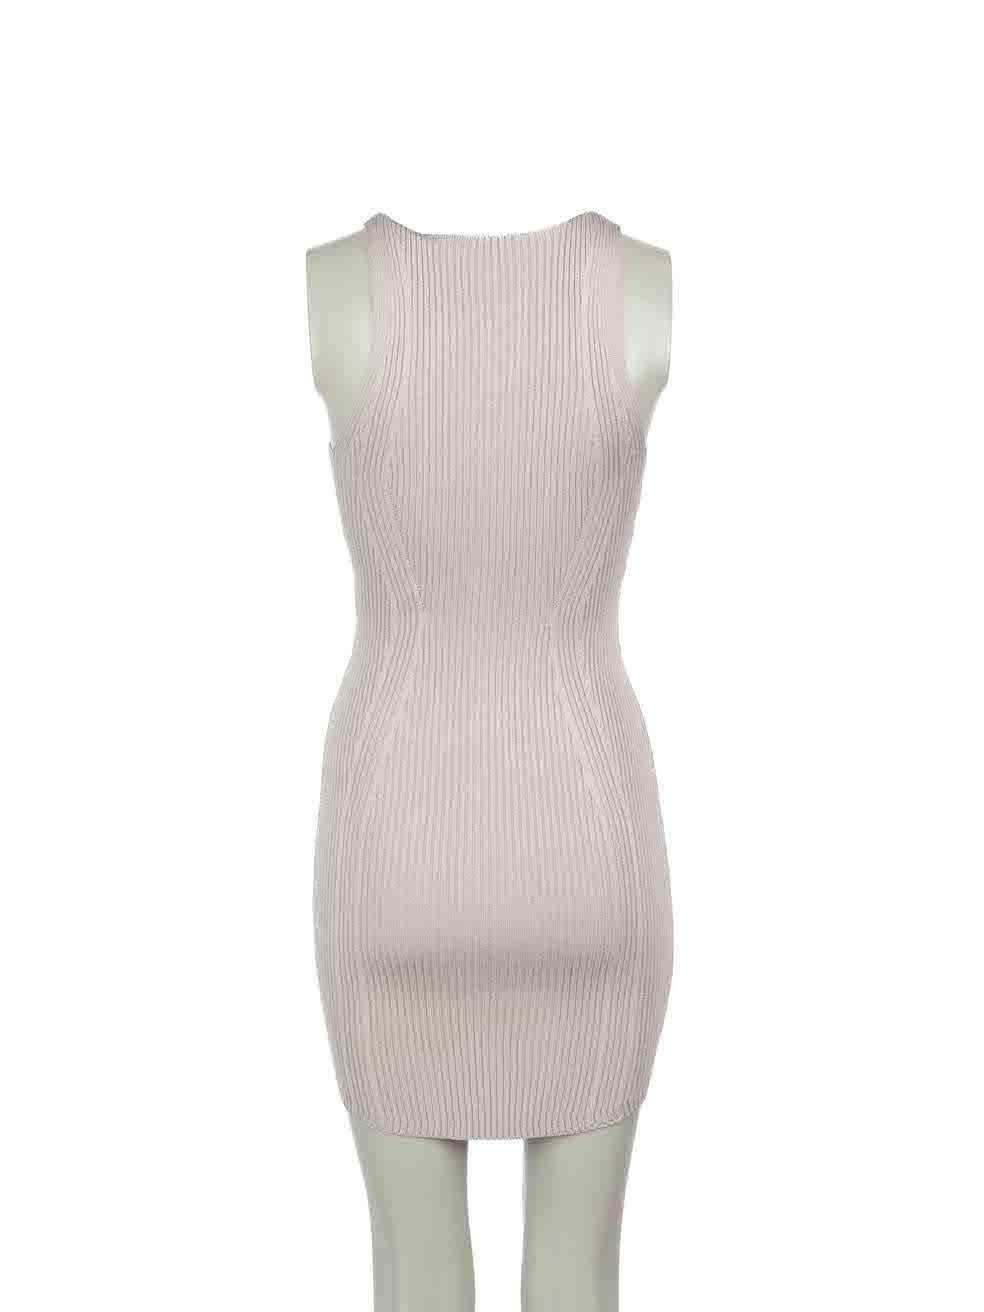 Balmain Grey Knit Bodycon Column Dress Size XS In Excellent Condition For Sale In London, GB